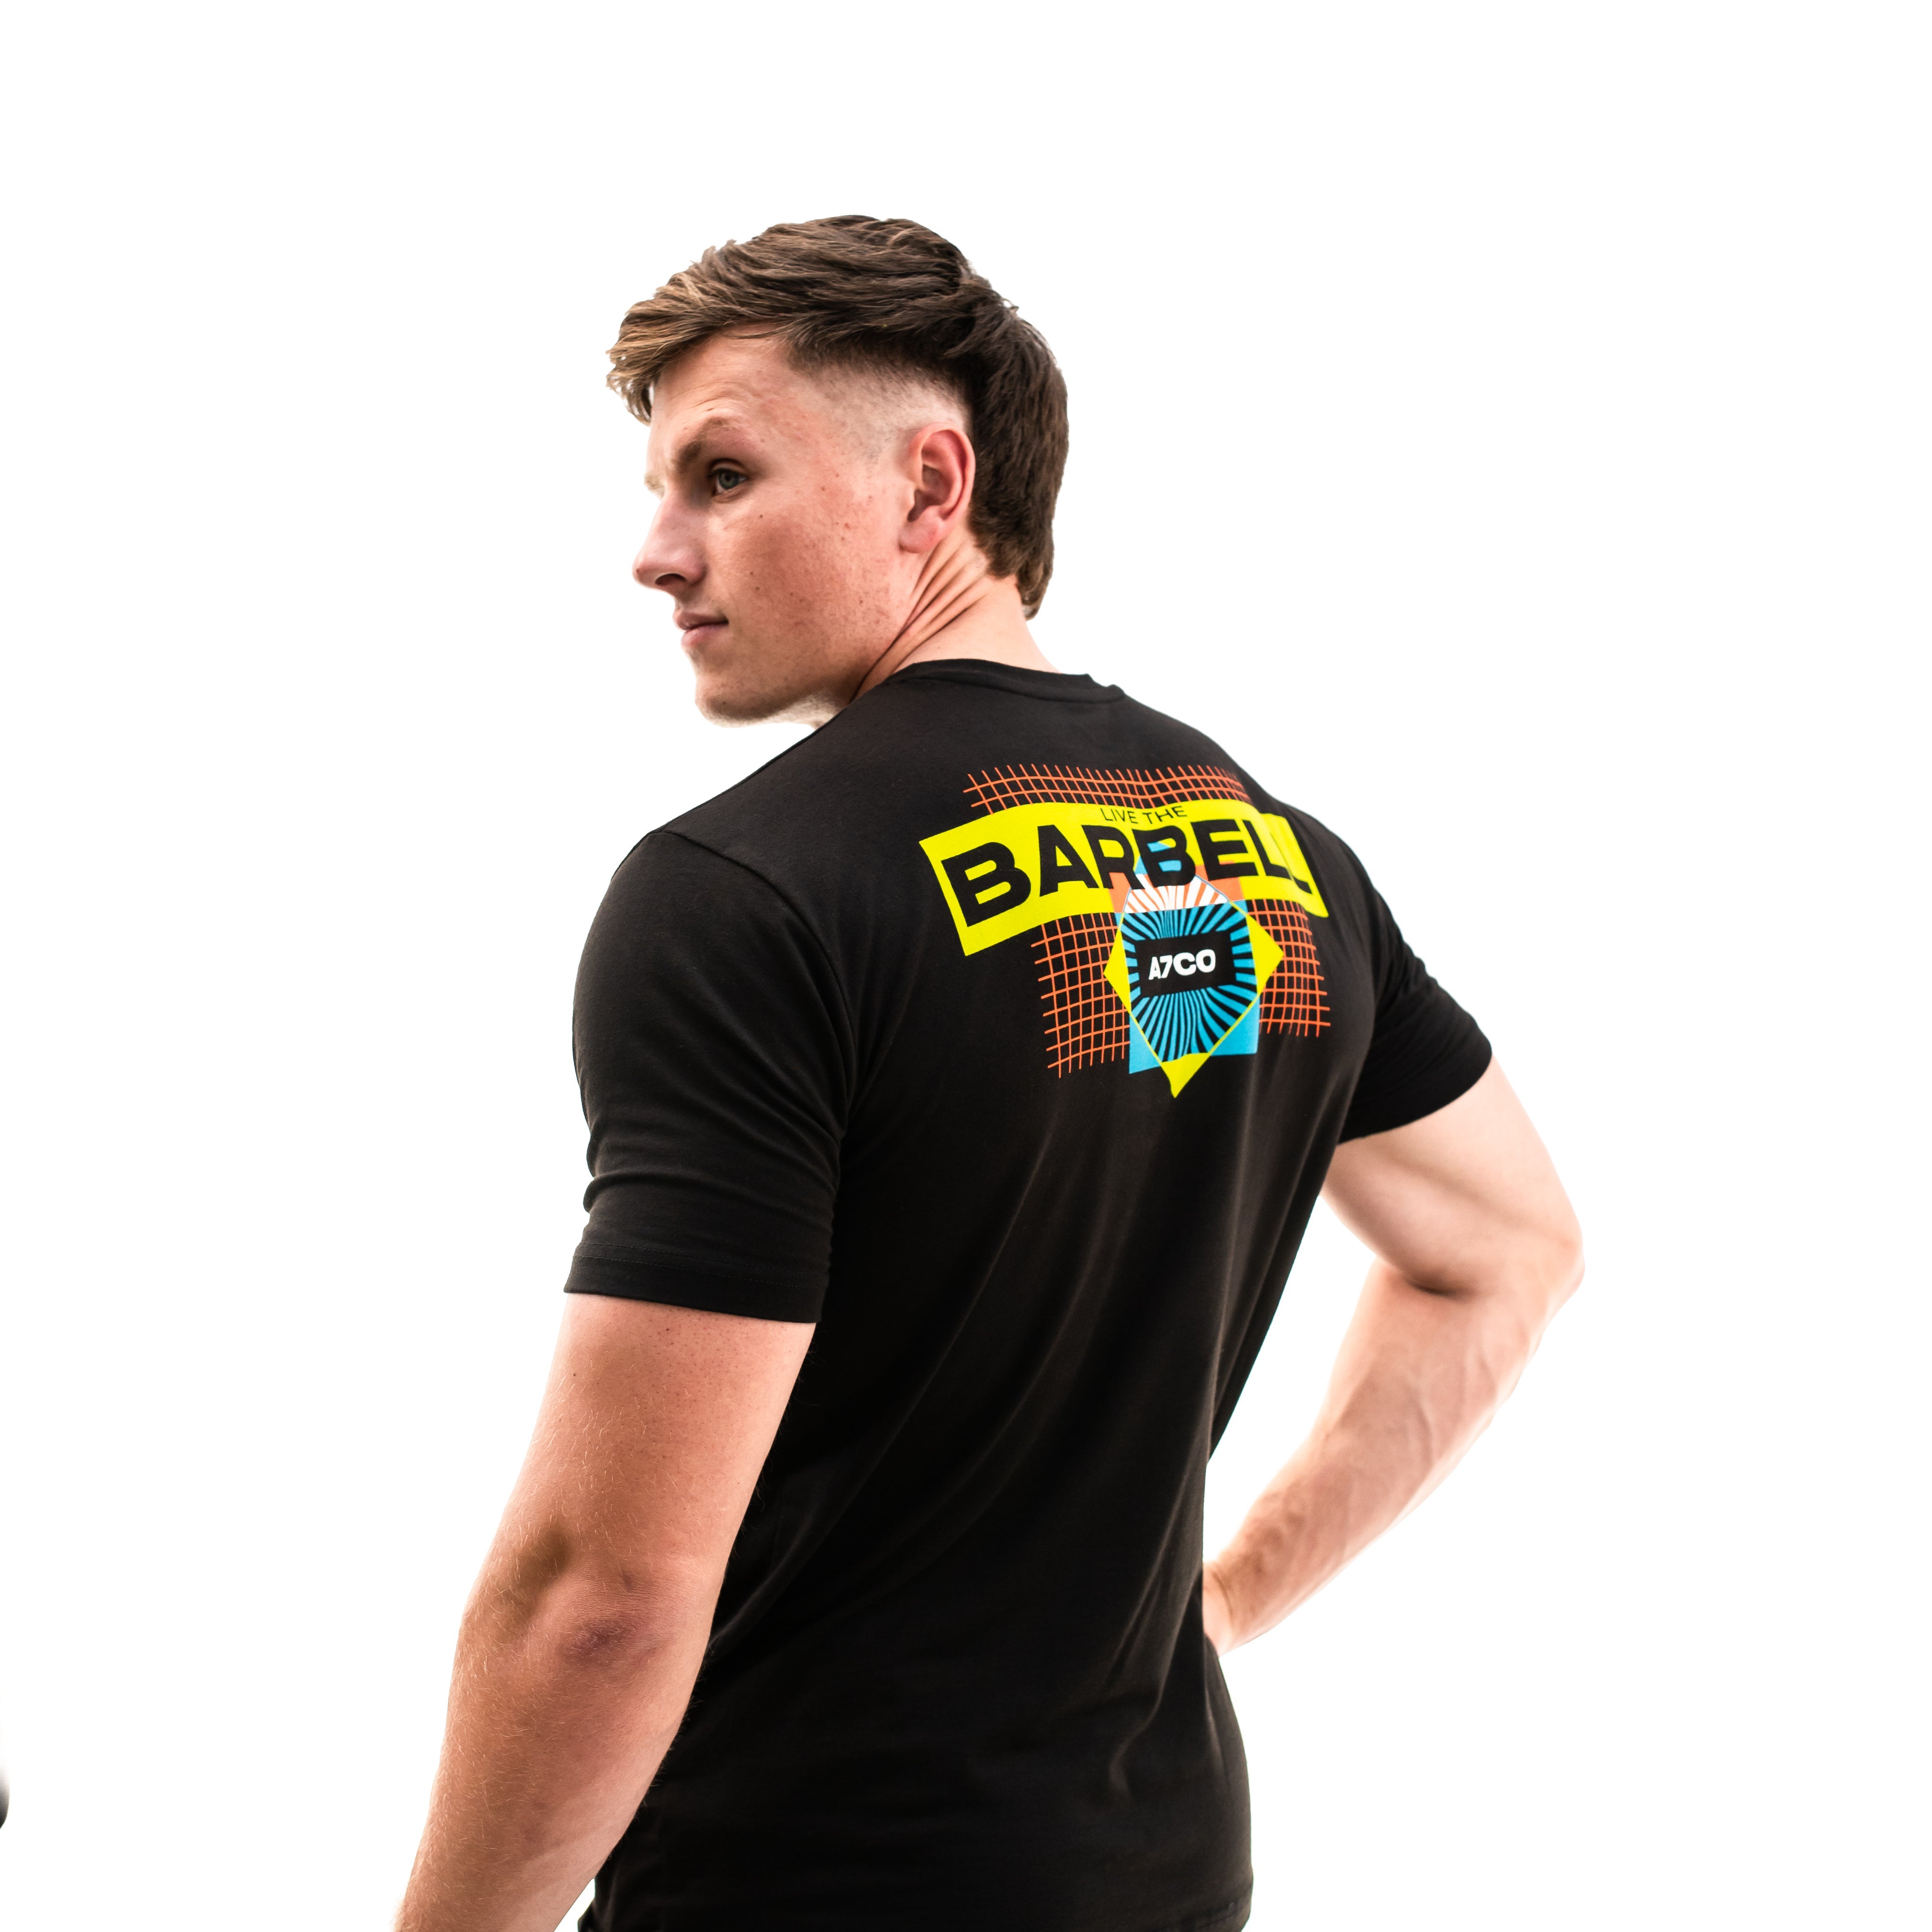 Gridlock Non Bar Grip T-Shirt is perfect for in and out of the gym. Purchase Gridlock Non Bar Grip t shirt from A7 UK. Purchase Gridlock Shirt in Europe from A7 Europe Best gymwear shipping to UK and Europe from A7 UK. Gridlock is our newest Non Bar Grip Design. The best Powerlifting apparel for all your workouts. Available in UK and Europe including France, Italy, Germany, Sweden and Poland.